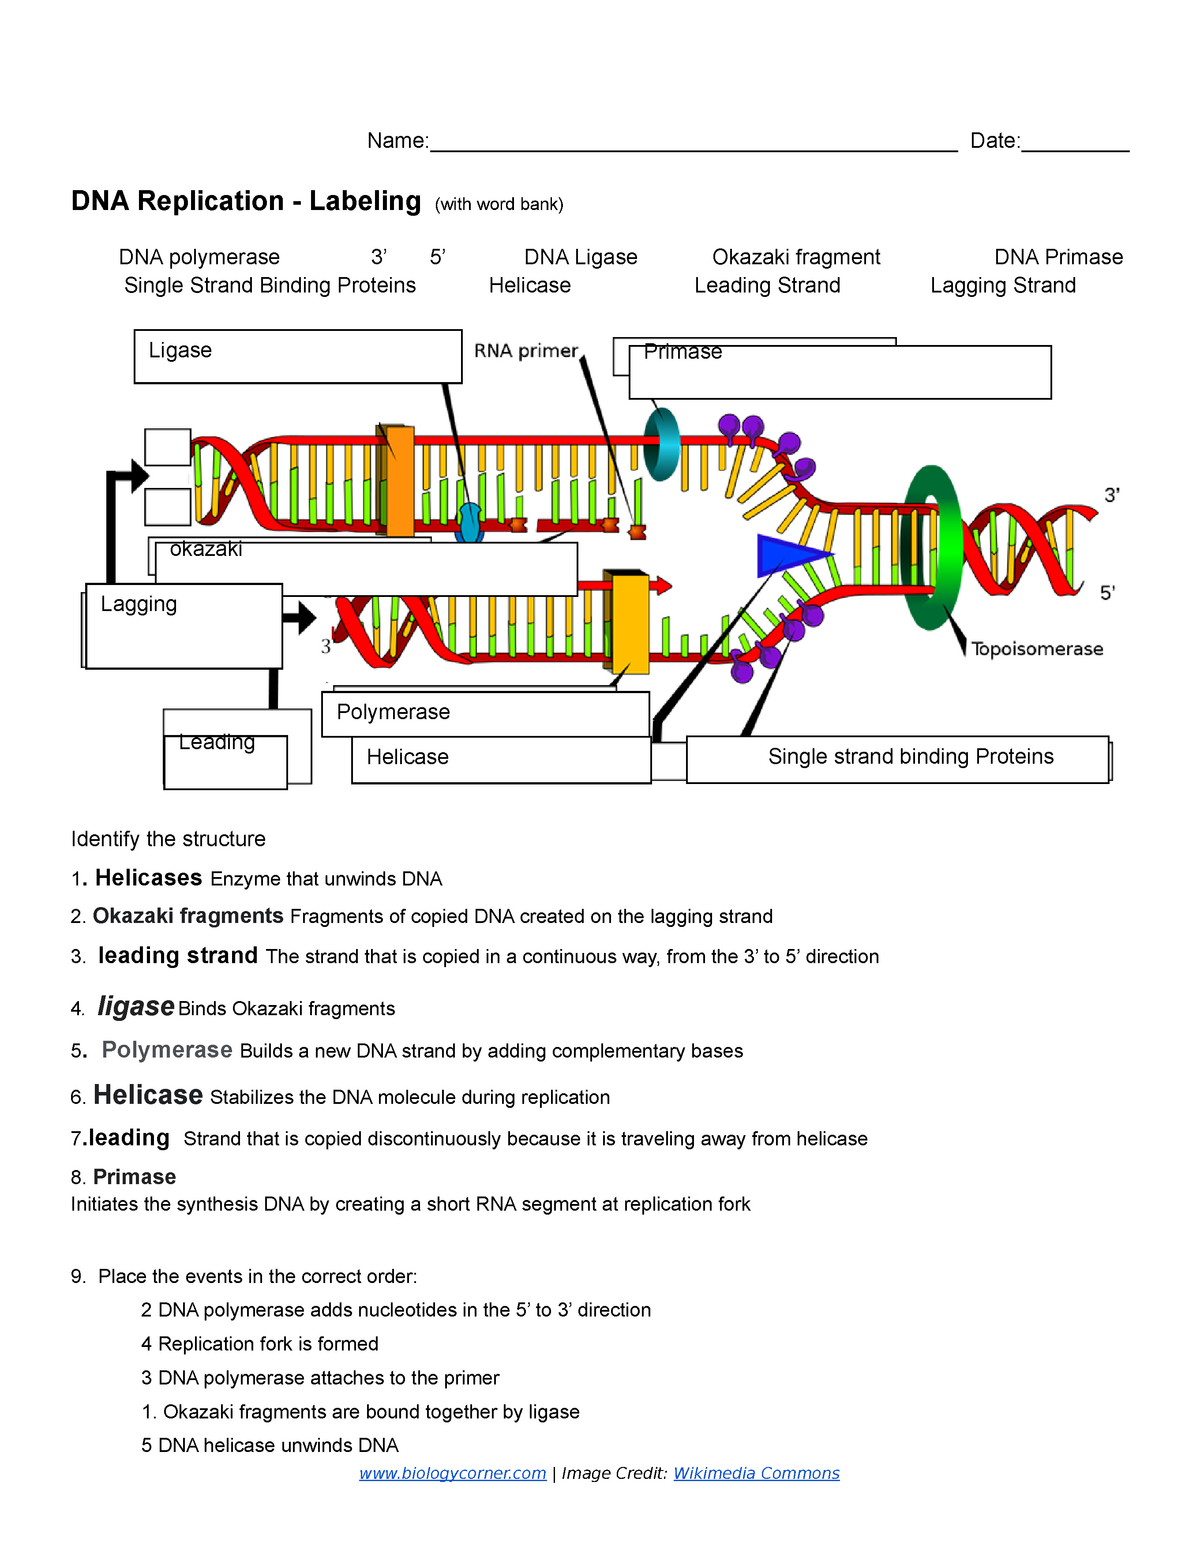 Copy of DNA Replication - Labeling 24 - Name: - StuDocu With Dna Replication Worksheet Key